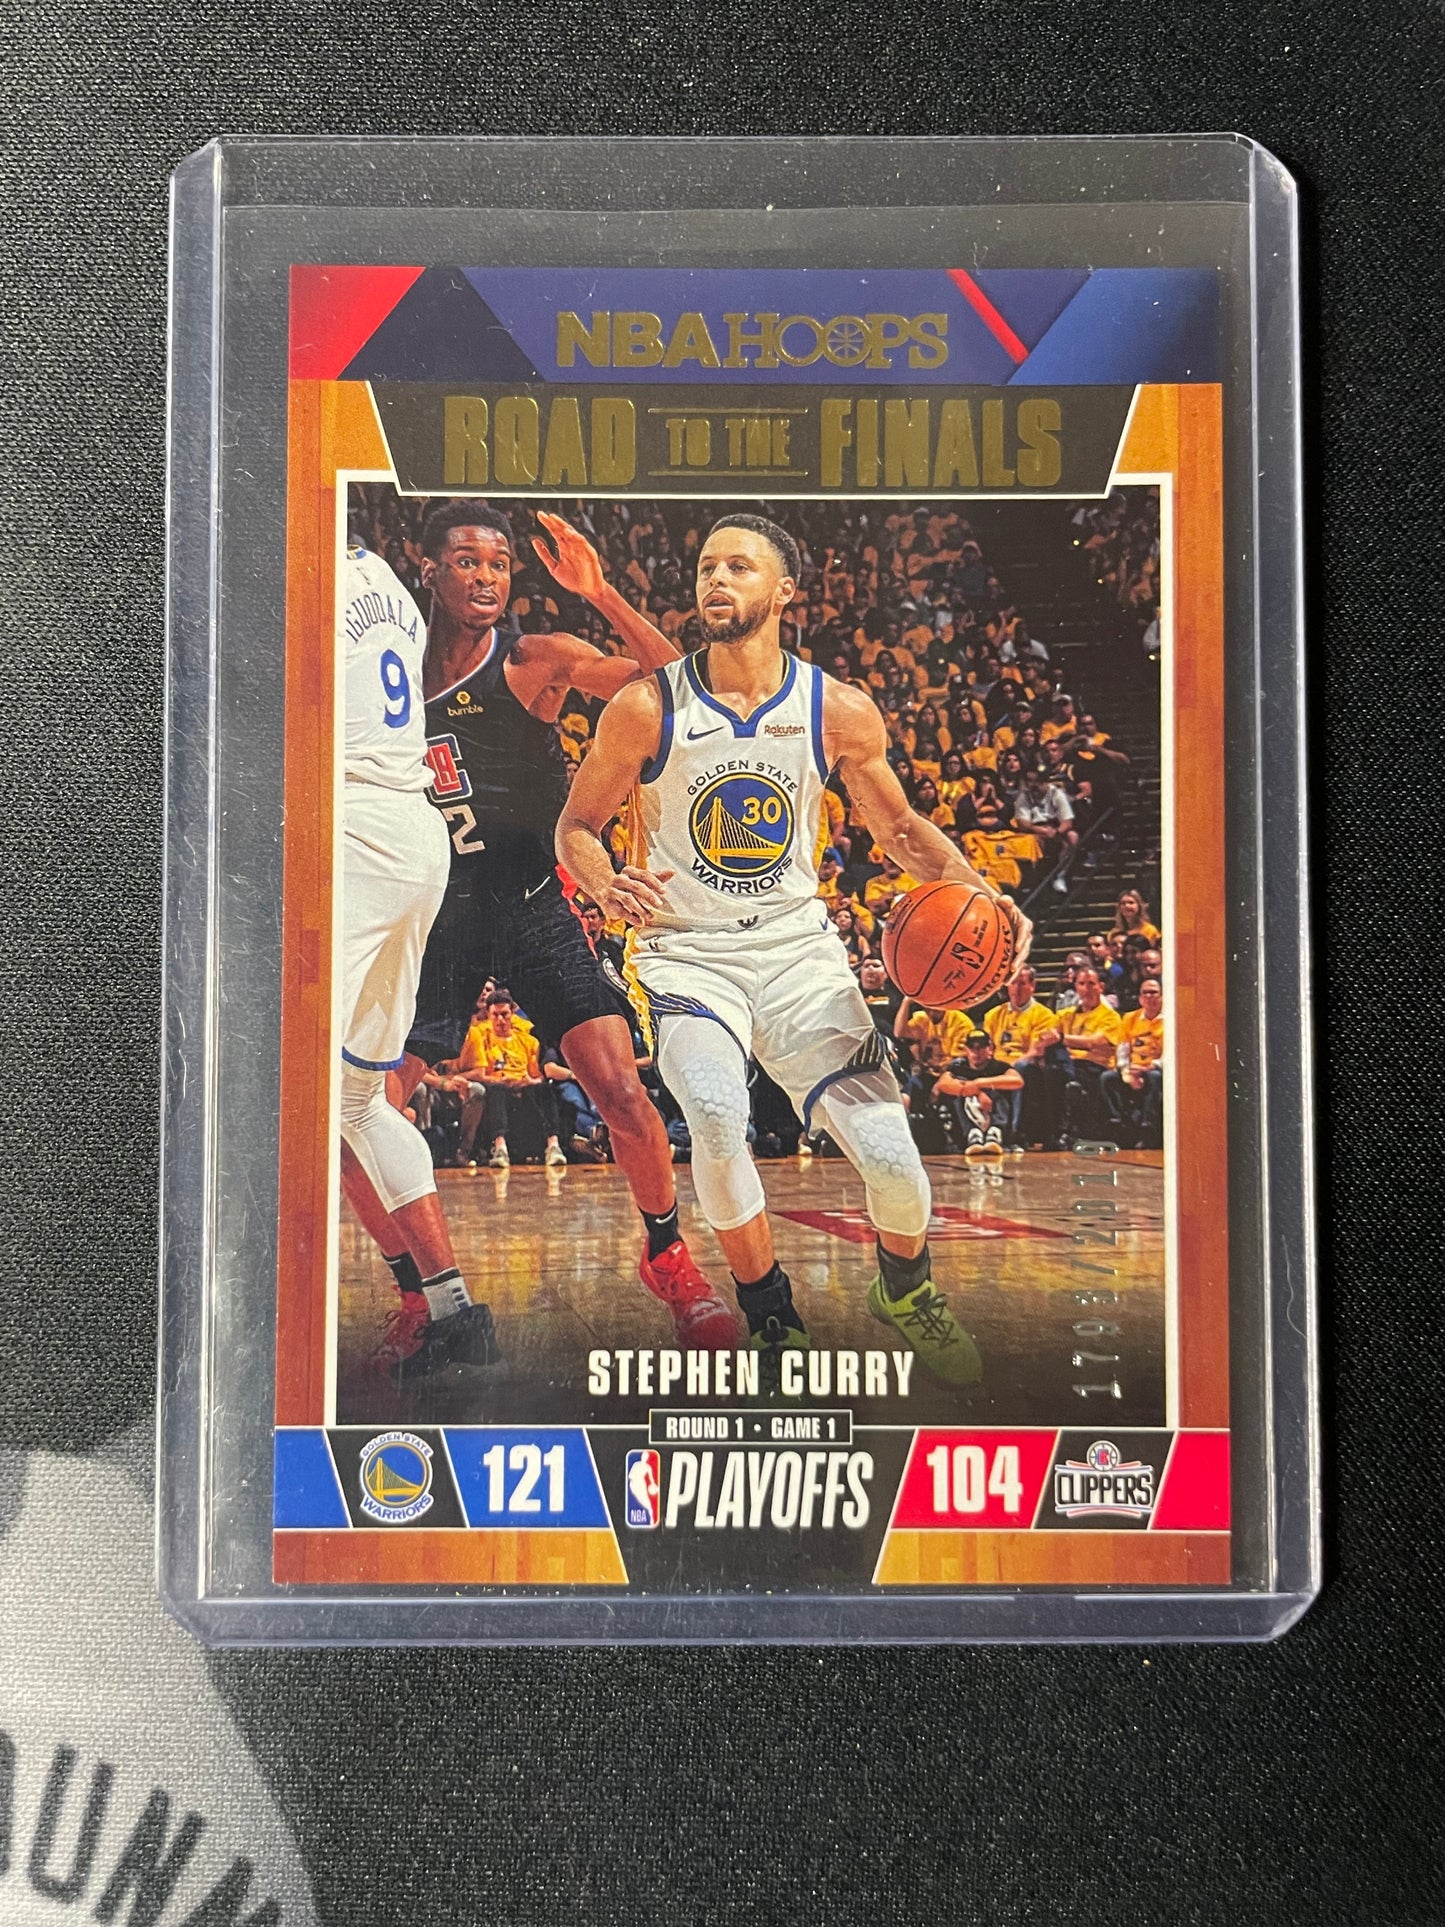 2019/20 Panini Hoops #3 Stephen Curry Road To The Finals 1793/2019